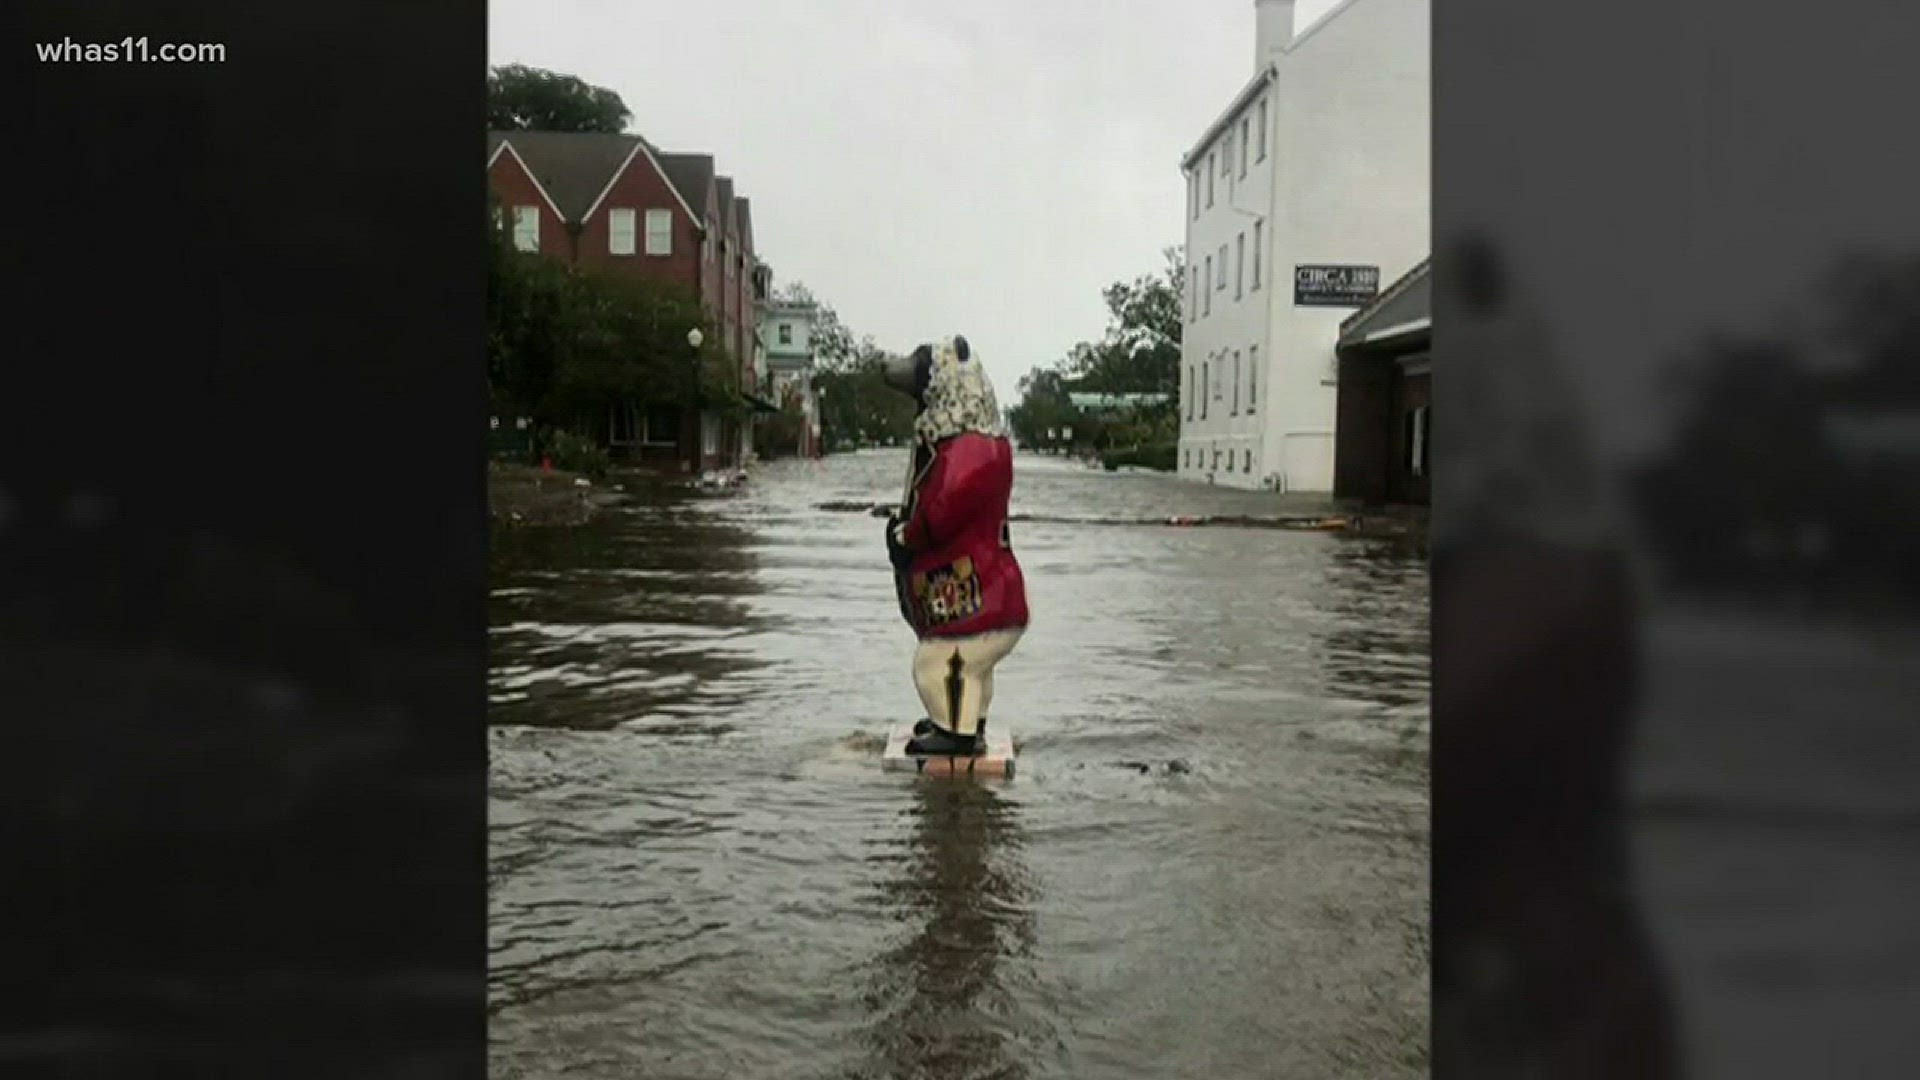 In New Bern North Carolina, the Nuese River flooding streets and businesses -- causing some things to wander off.